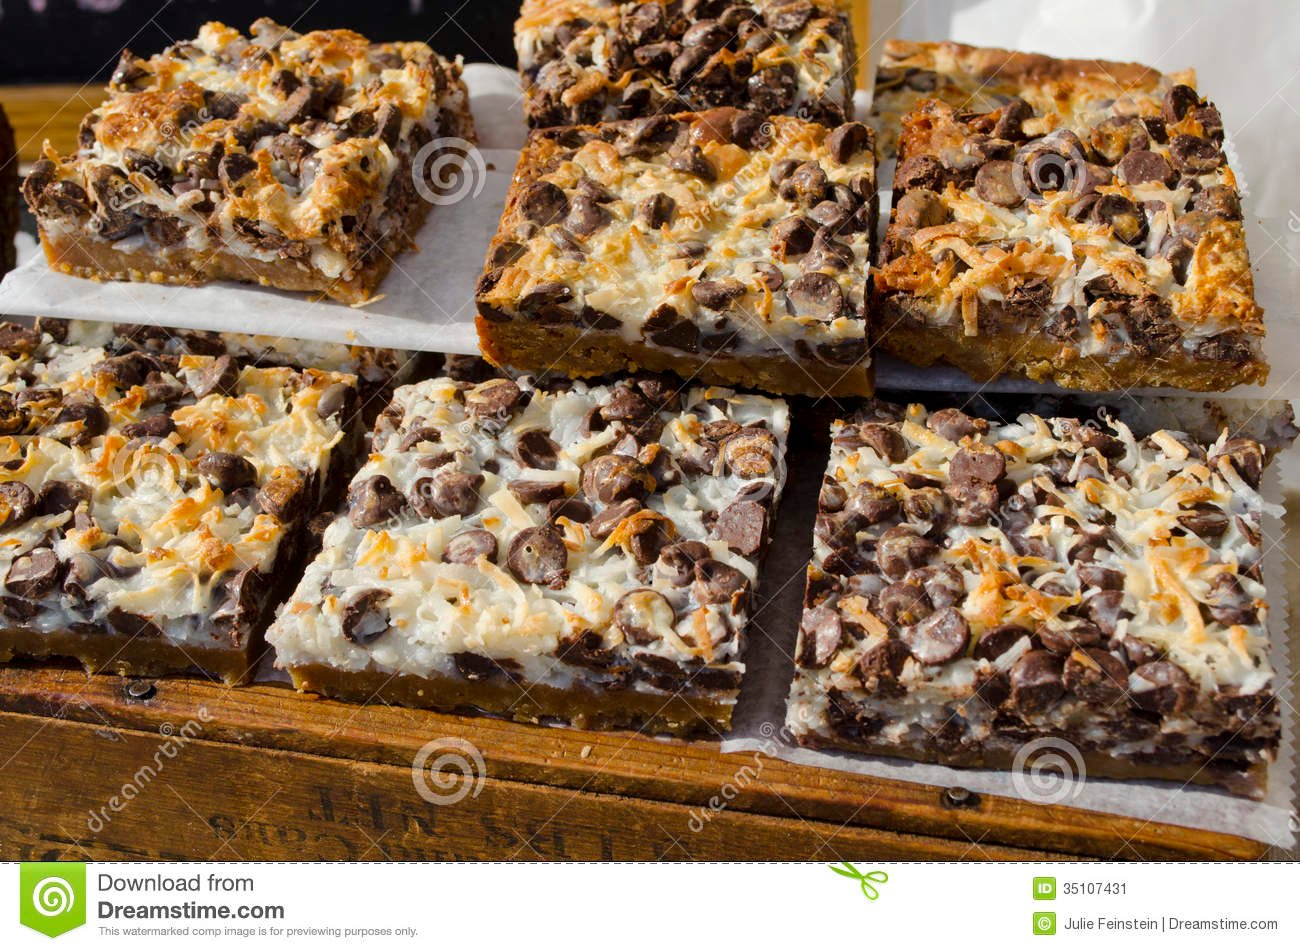 Bar Cookies Stock Image  Image Of Dessert, Caloric, Chips